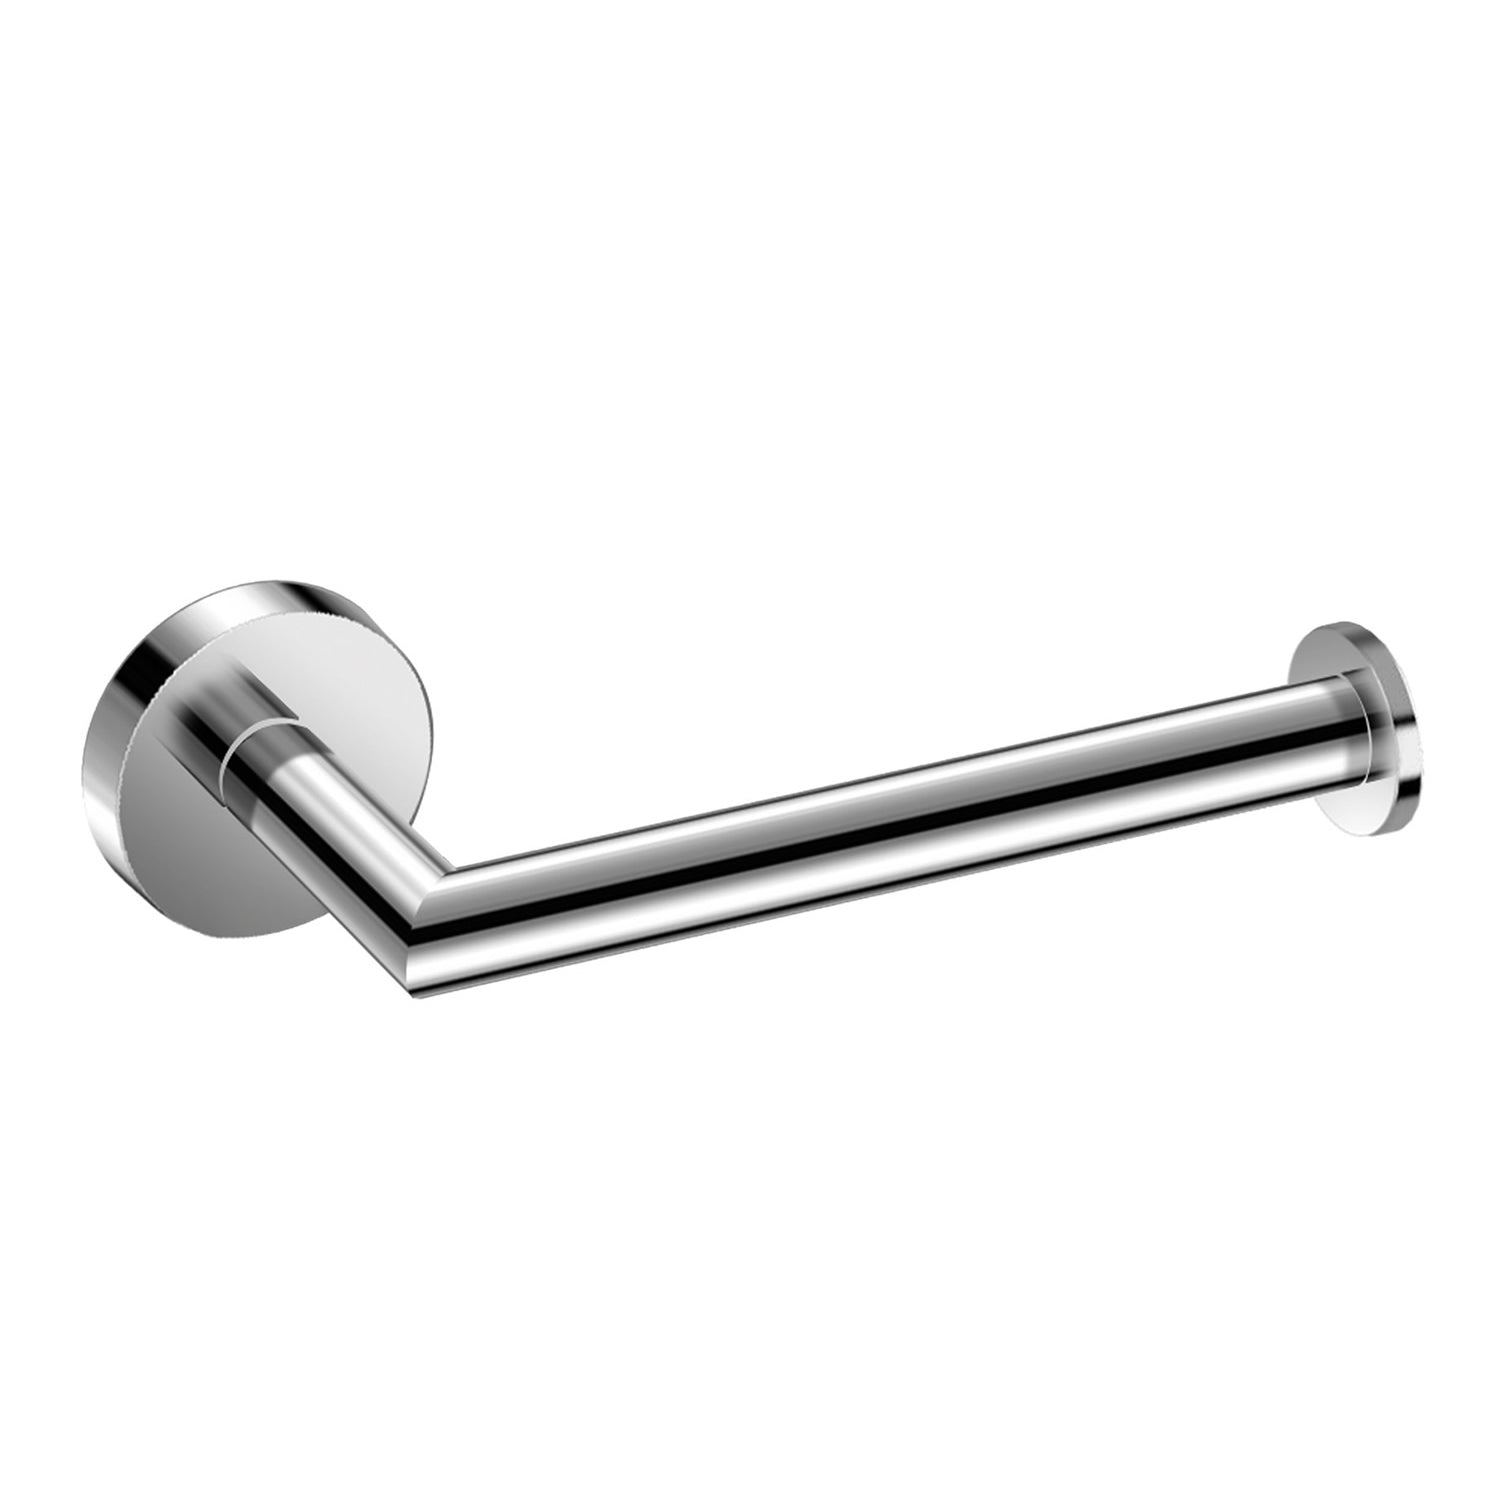 DAX Valencia Toilet Paper Holder, Right Opening, Round Line, Wall Mount, Brass Body, Chrome Finish, 6-11/16 x 3-1/4 x 2 Inches (DAX-GDC120156-CR)